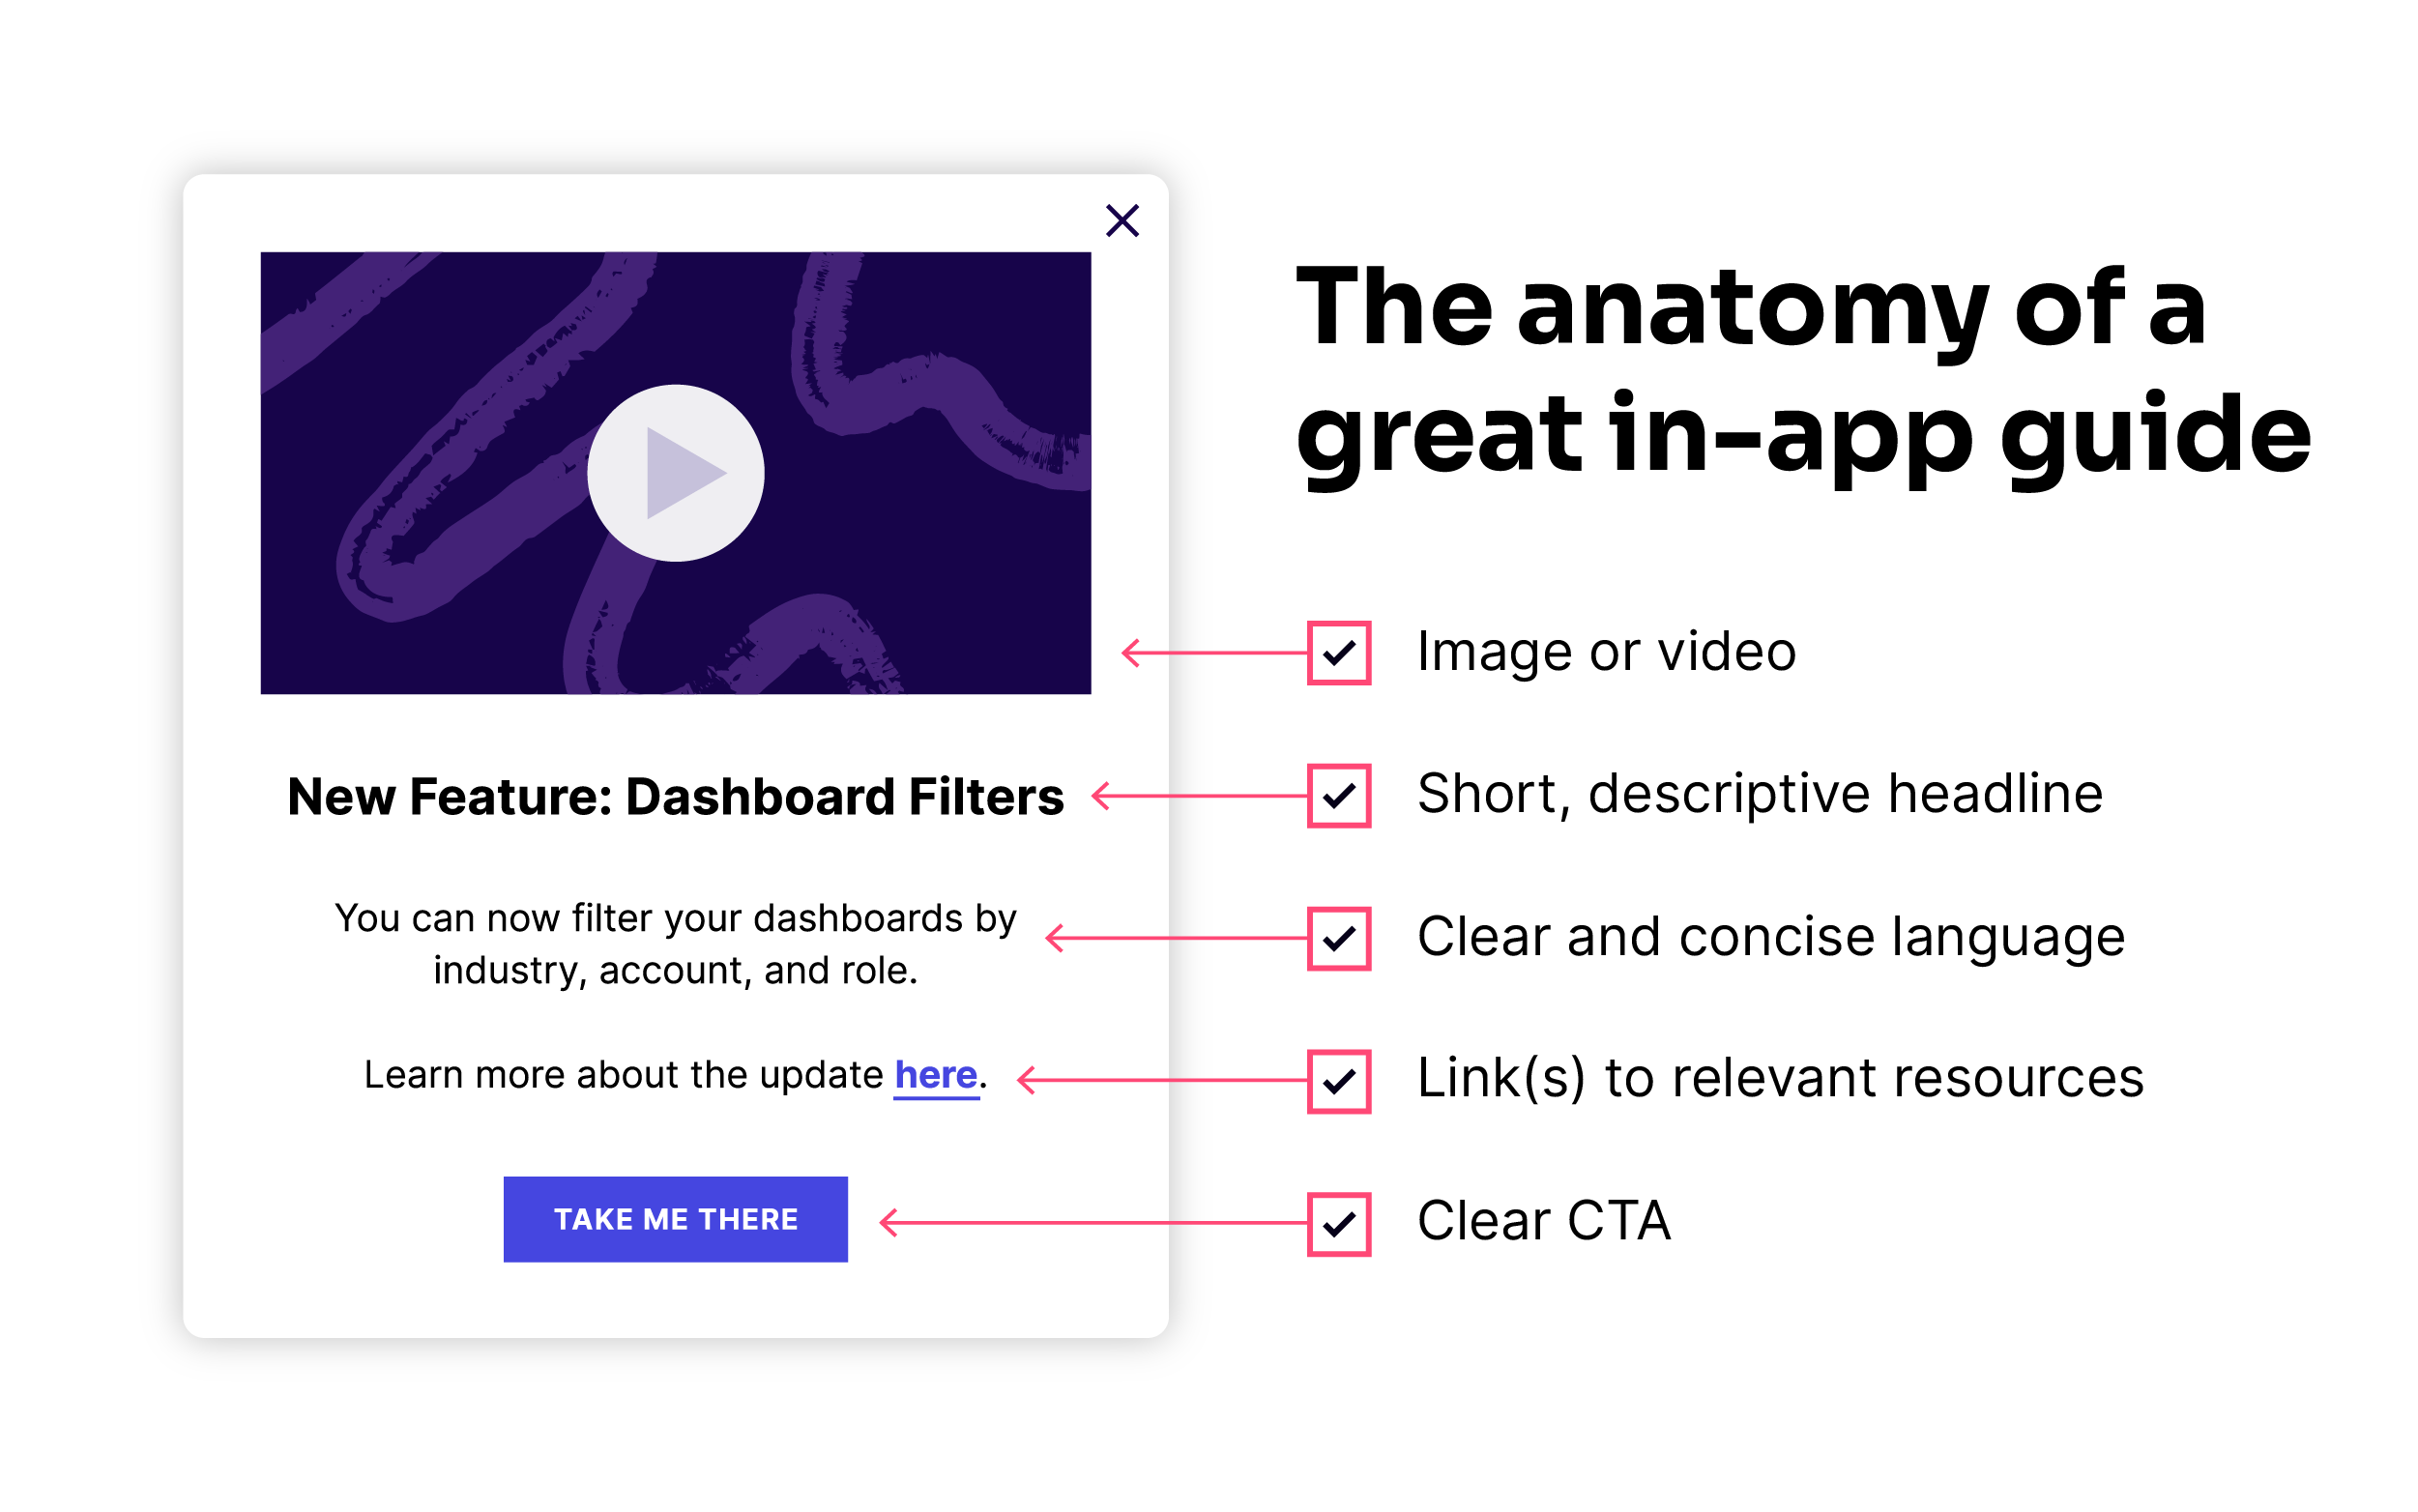 The anatomy of a great in-app guide